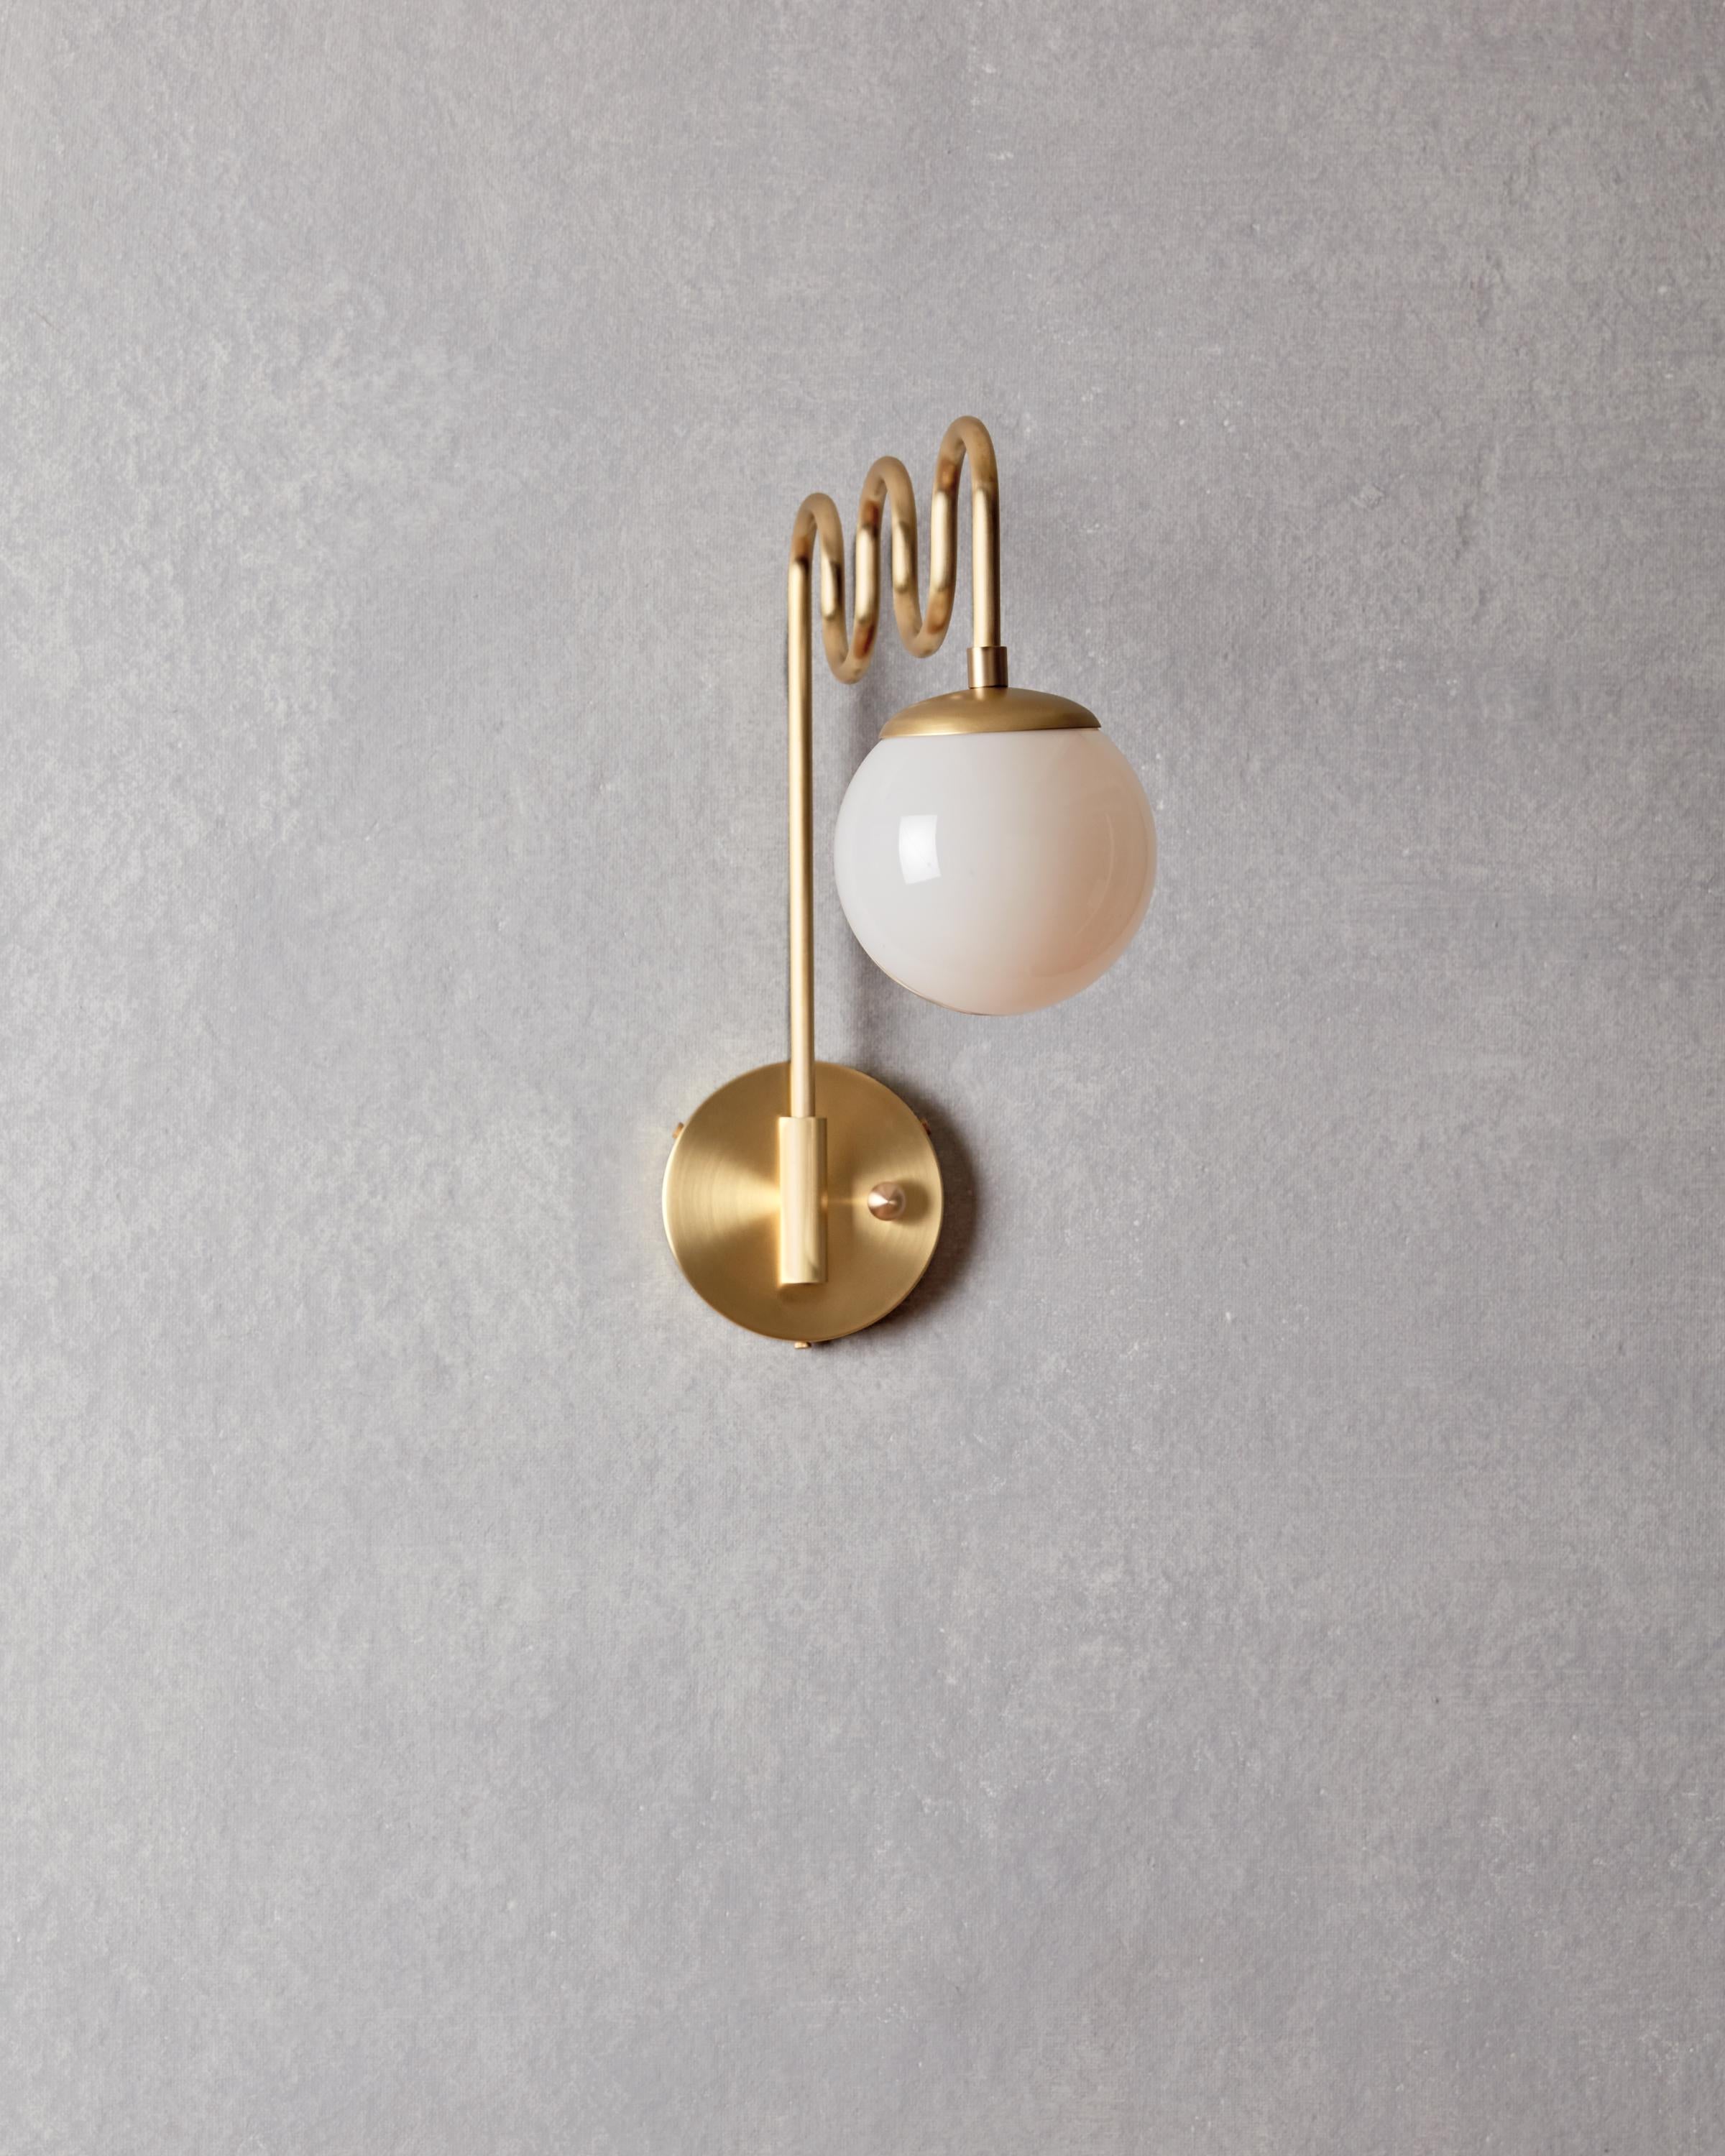 Hand-Crafted Satin Brass Cecil Sconce - Milk Glass Globe For Sale